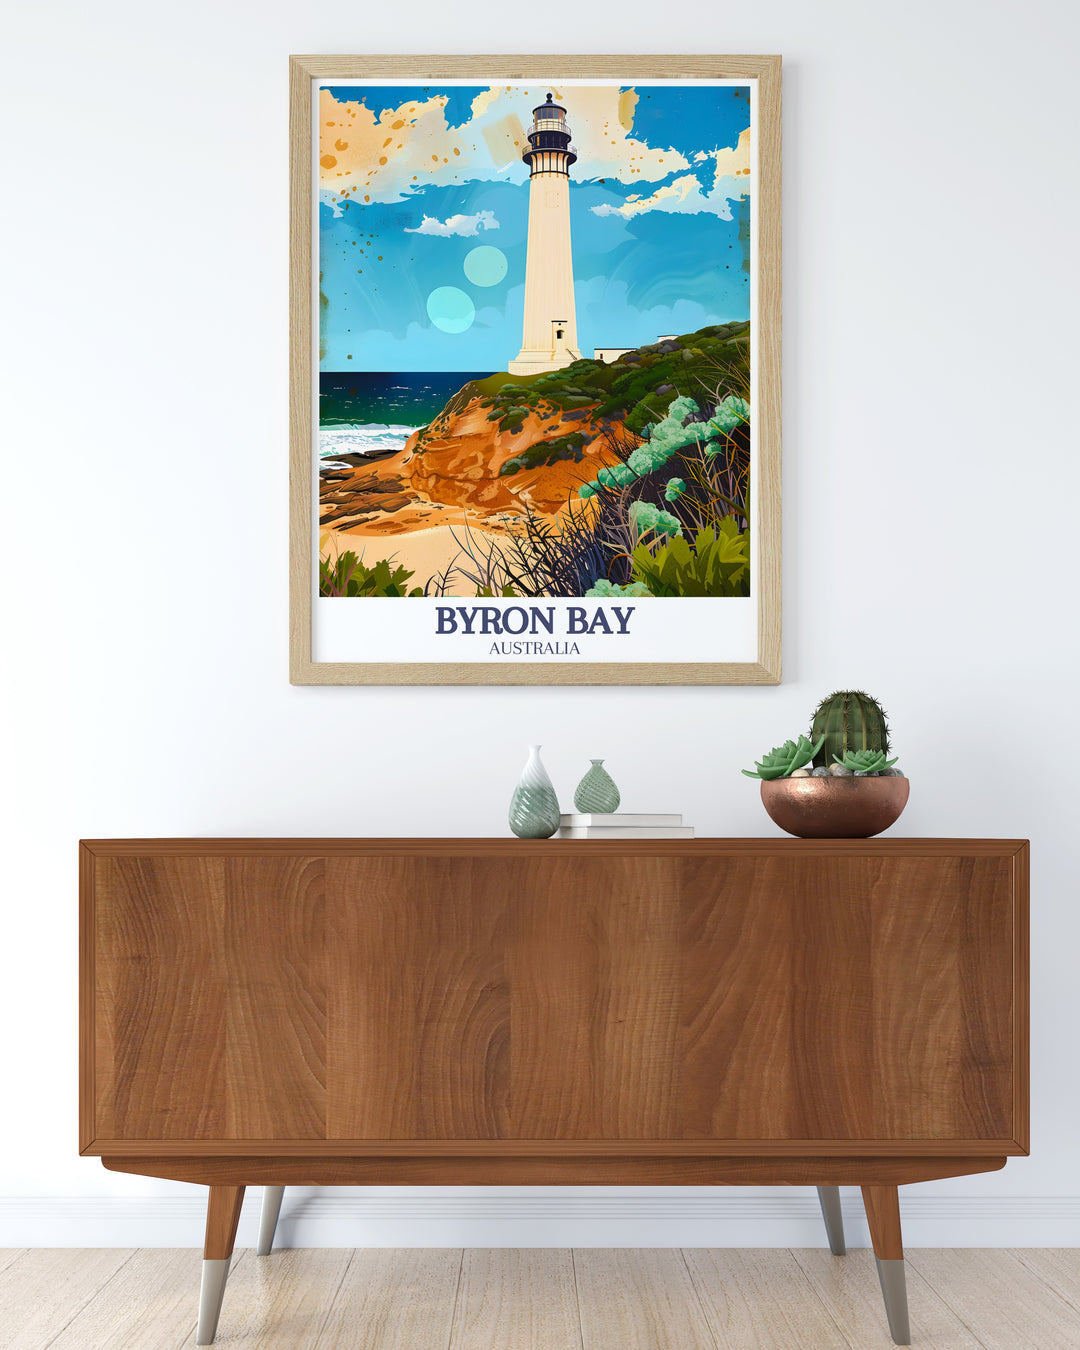 Byron Bay Decor featuring Main Beach and Byron Bay Lighthouse ideal for enhancing your home or office. This colorful art print brings the iconic views of Byron Bay into your space creating a captivating focal point.